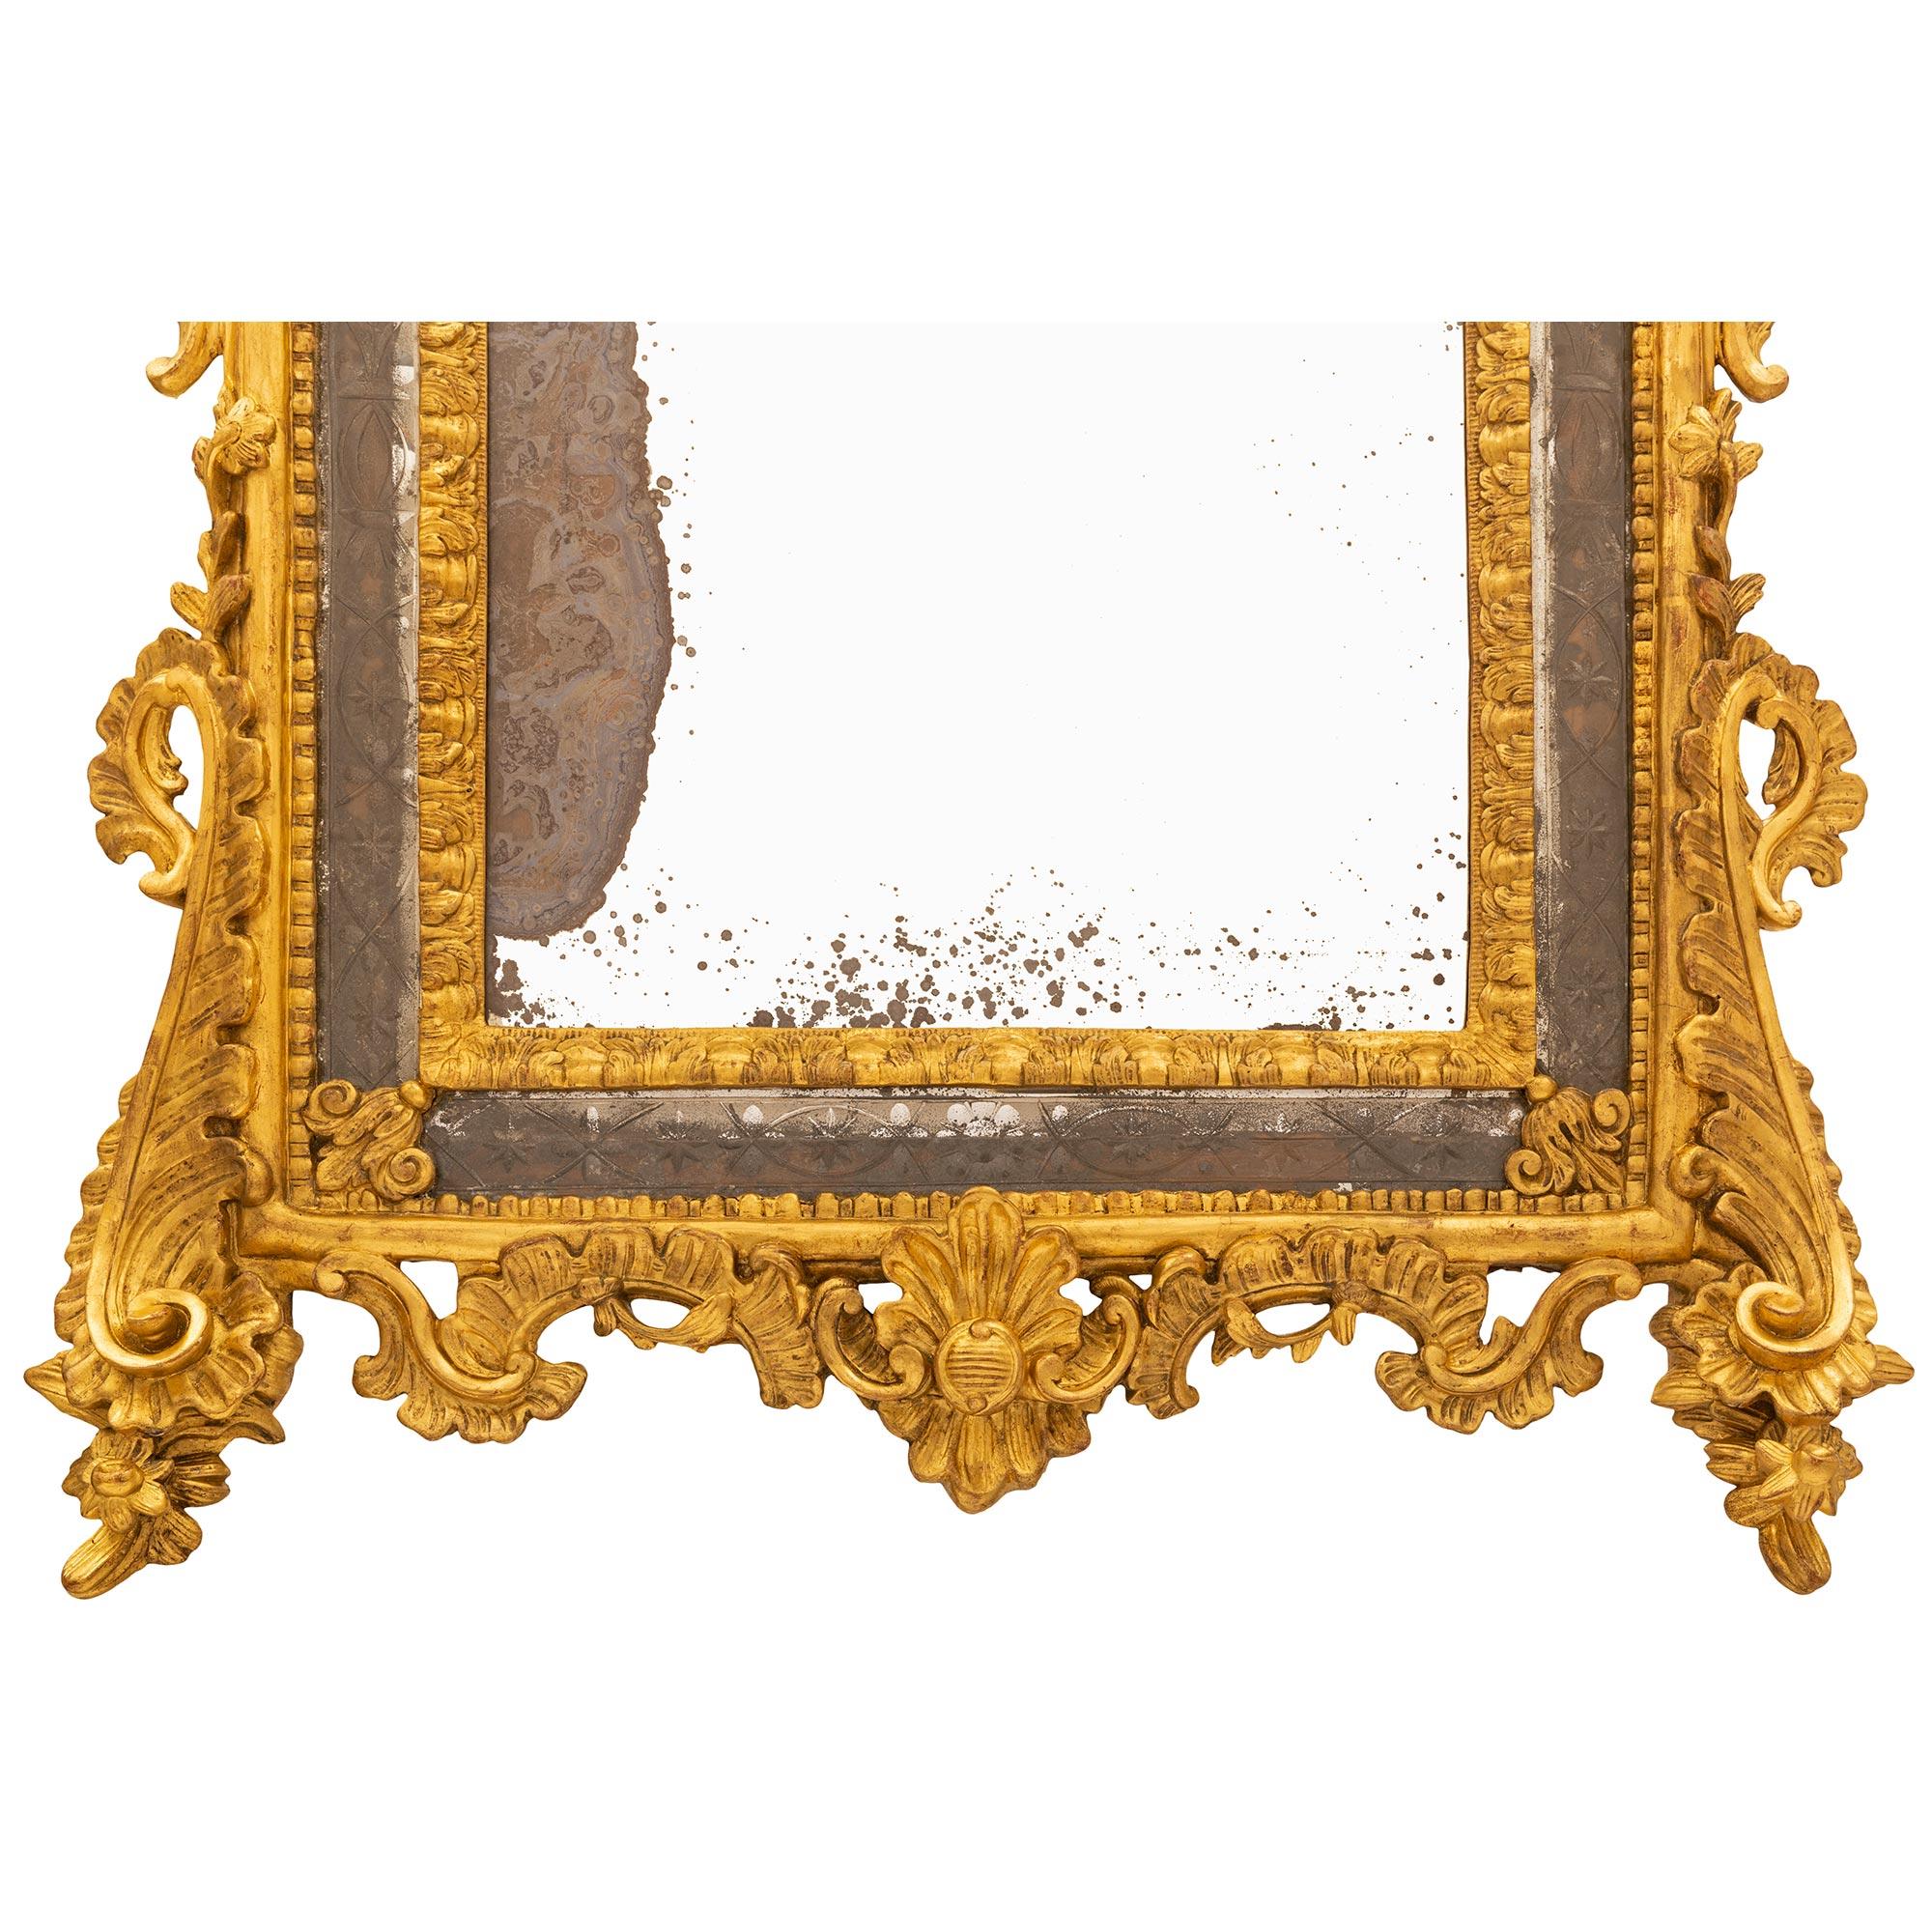 An Italian 18th Century Baroque St. Double Framed Giltwood Mirror In Good Condition For Sale In West Palm Beach, FL